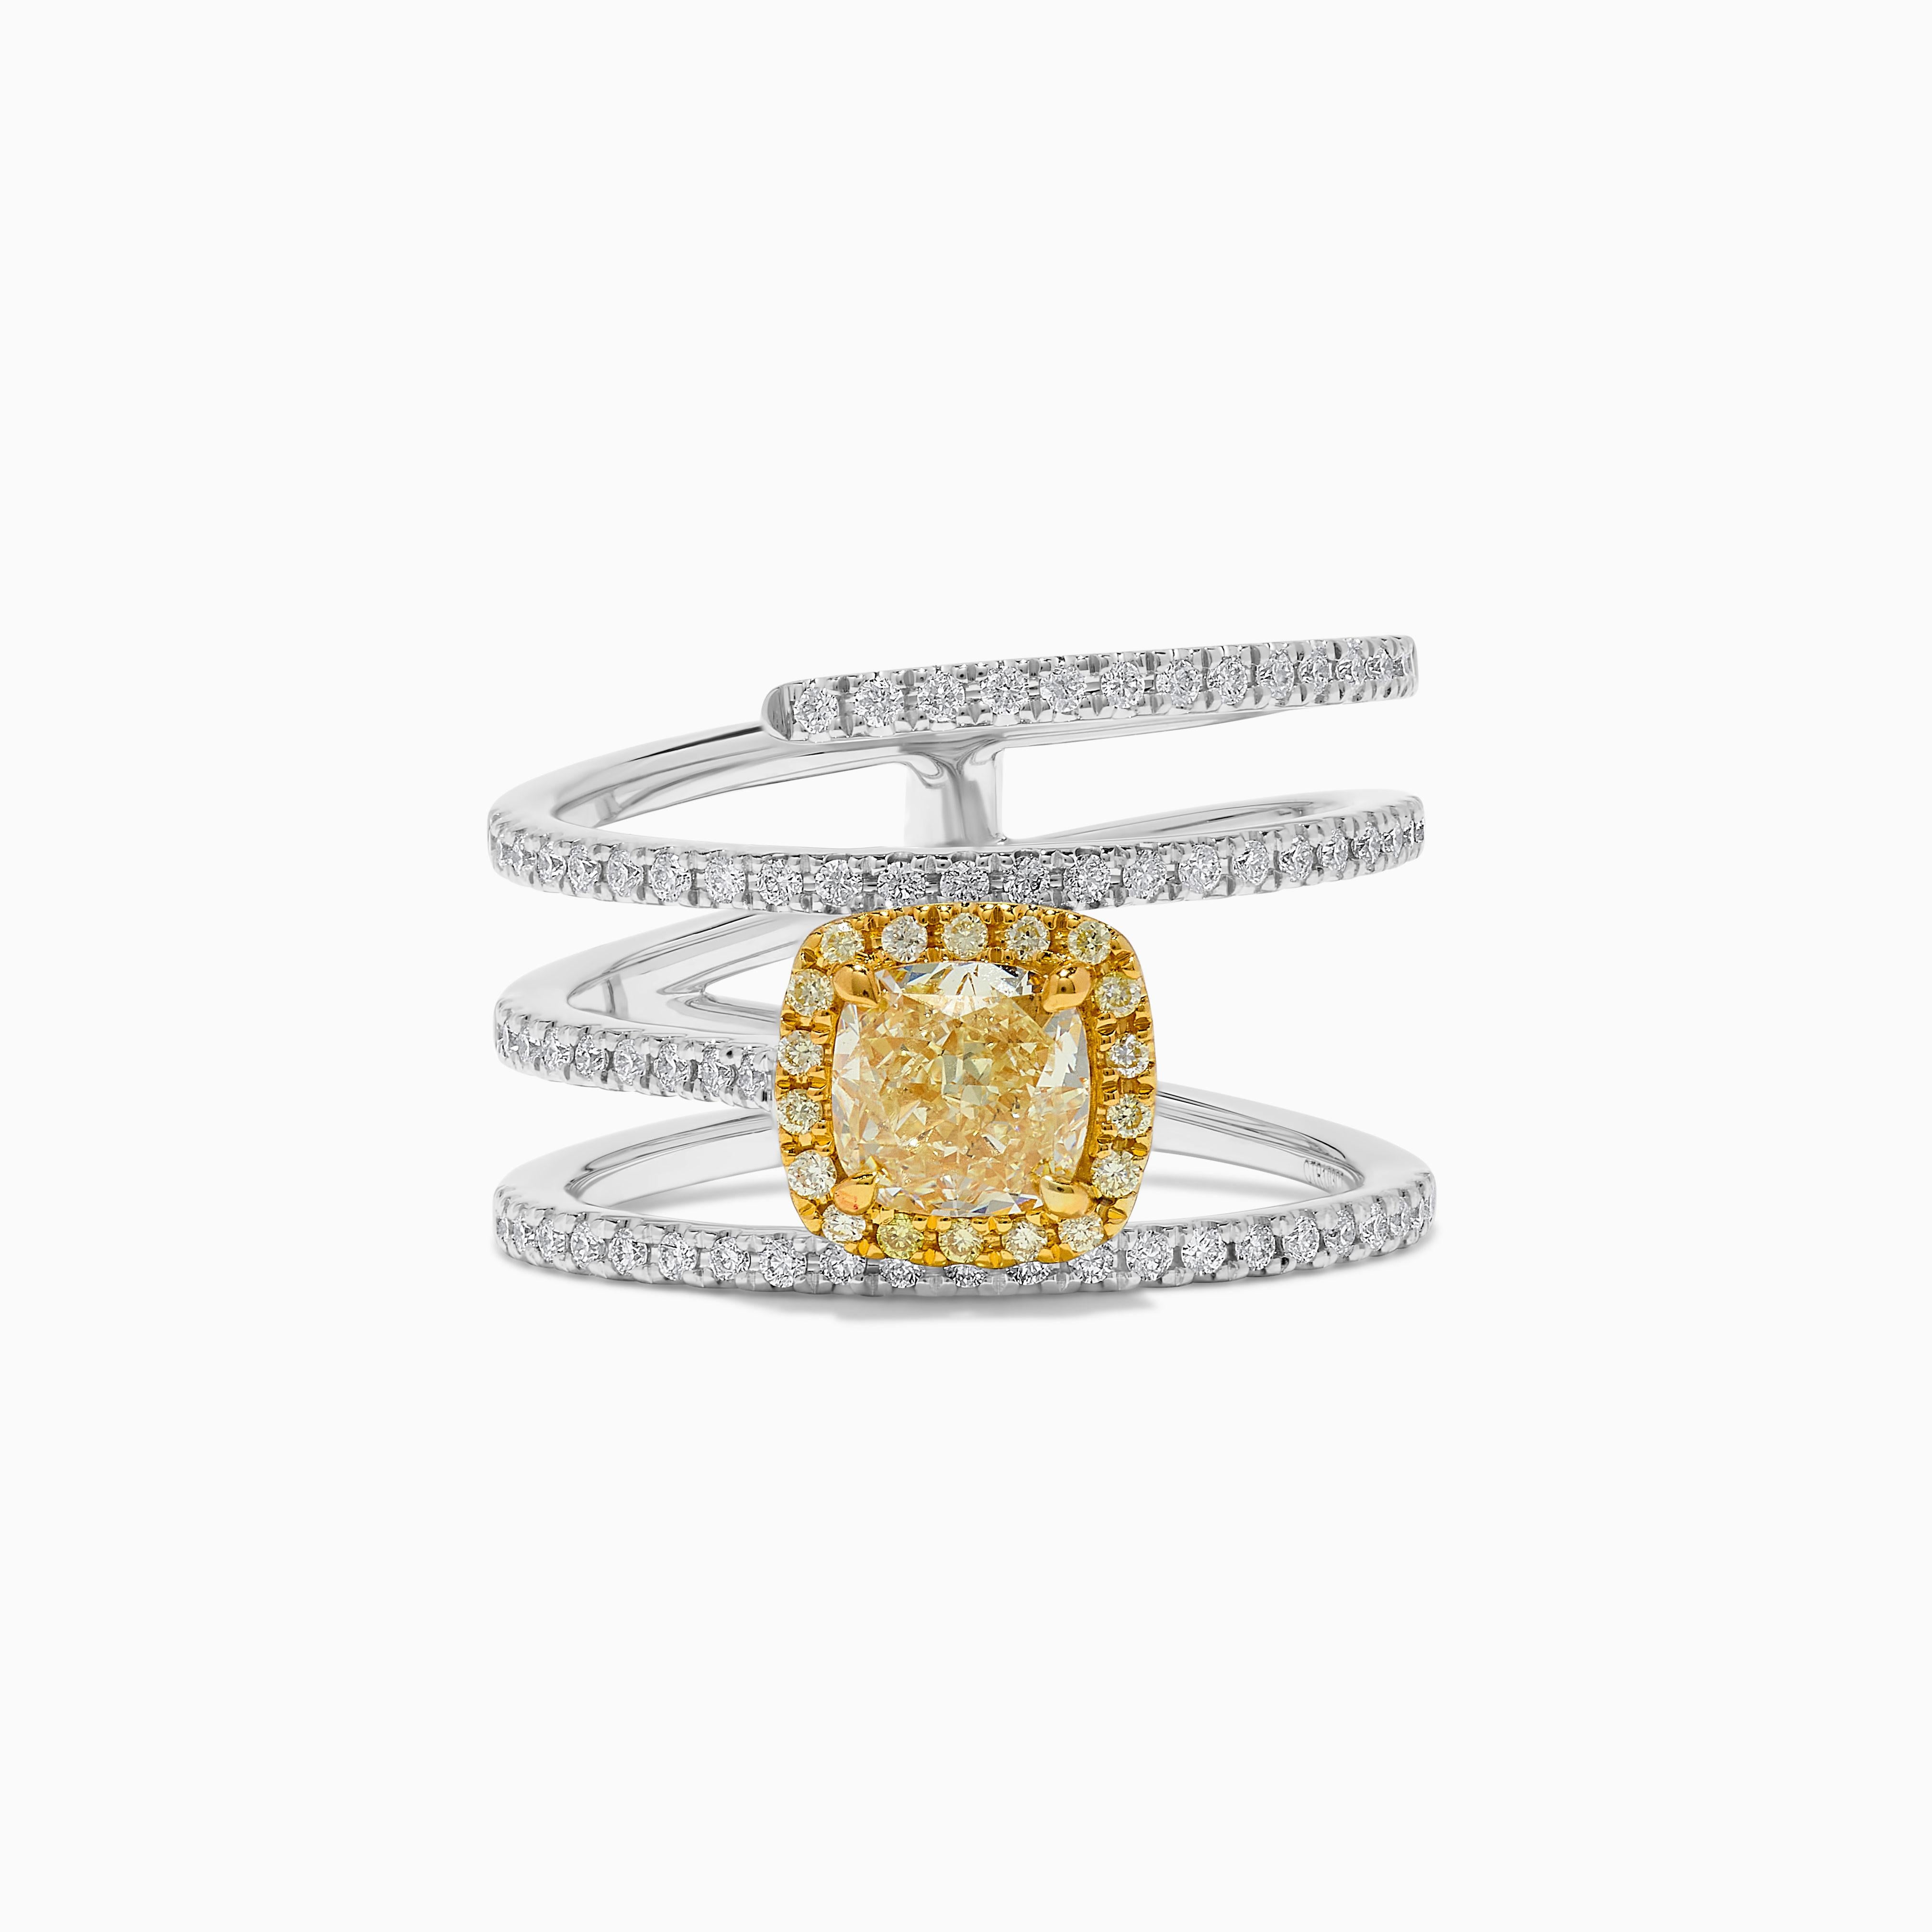 RareGemWorld's classic GIA certified diamond ring. Mounted in a beautiful 18K Yellow and White Gold setting with a natural cushion cut yellow diamond. The yellow diamond is surrounded by round natural white diamond melee and natural round yellow